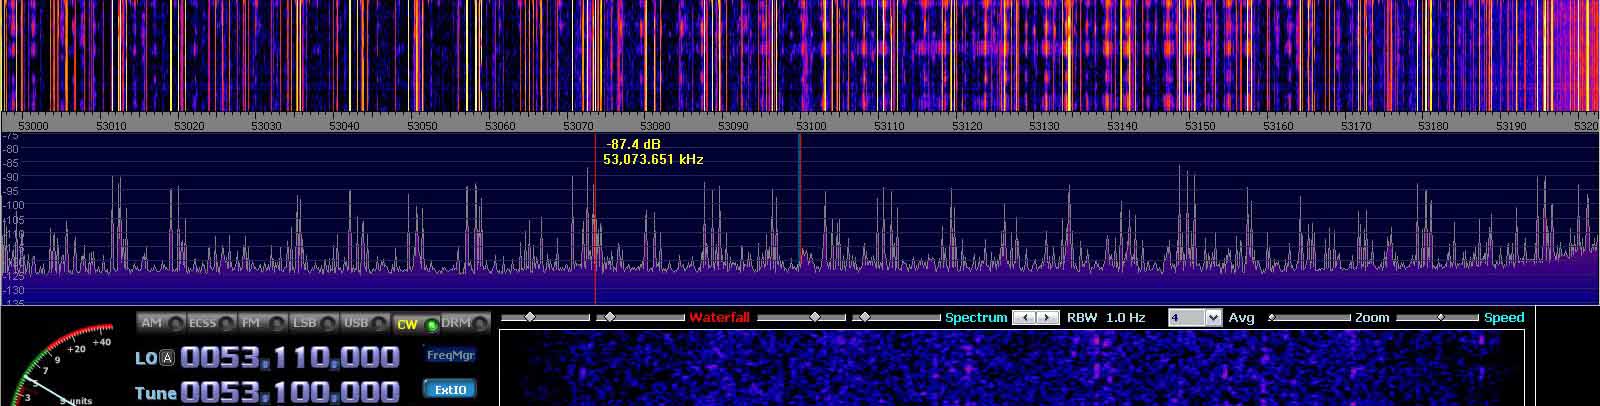 2014-07-04 53.100 MHz +- 100 kHz - Strong Es - 4-el dipole array with ends to St P - (c) OH7HJ.JPG